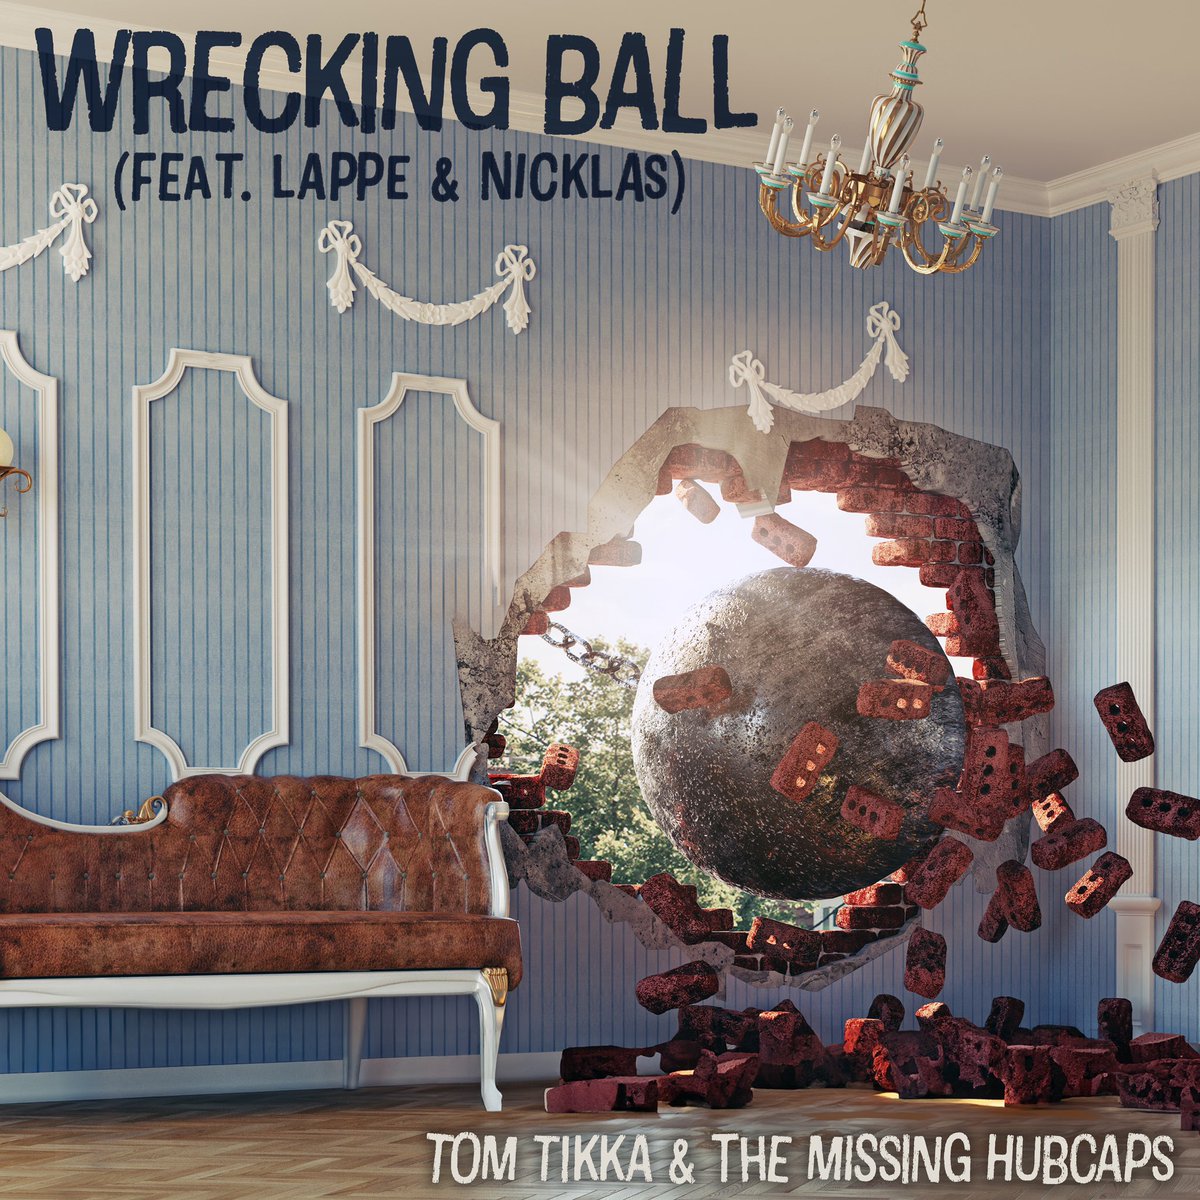 Super excited about the upcoming single, 'Wrecking Ball', featuring the amazing talents of two fellow members of the Carmen Gray family: Nicklas Nyman and Lappe Holopainen. #newmusic #carmengray #TOMTIKKA #newmusicalert #rock